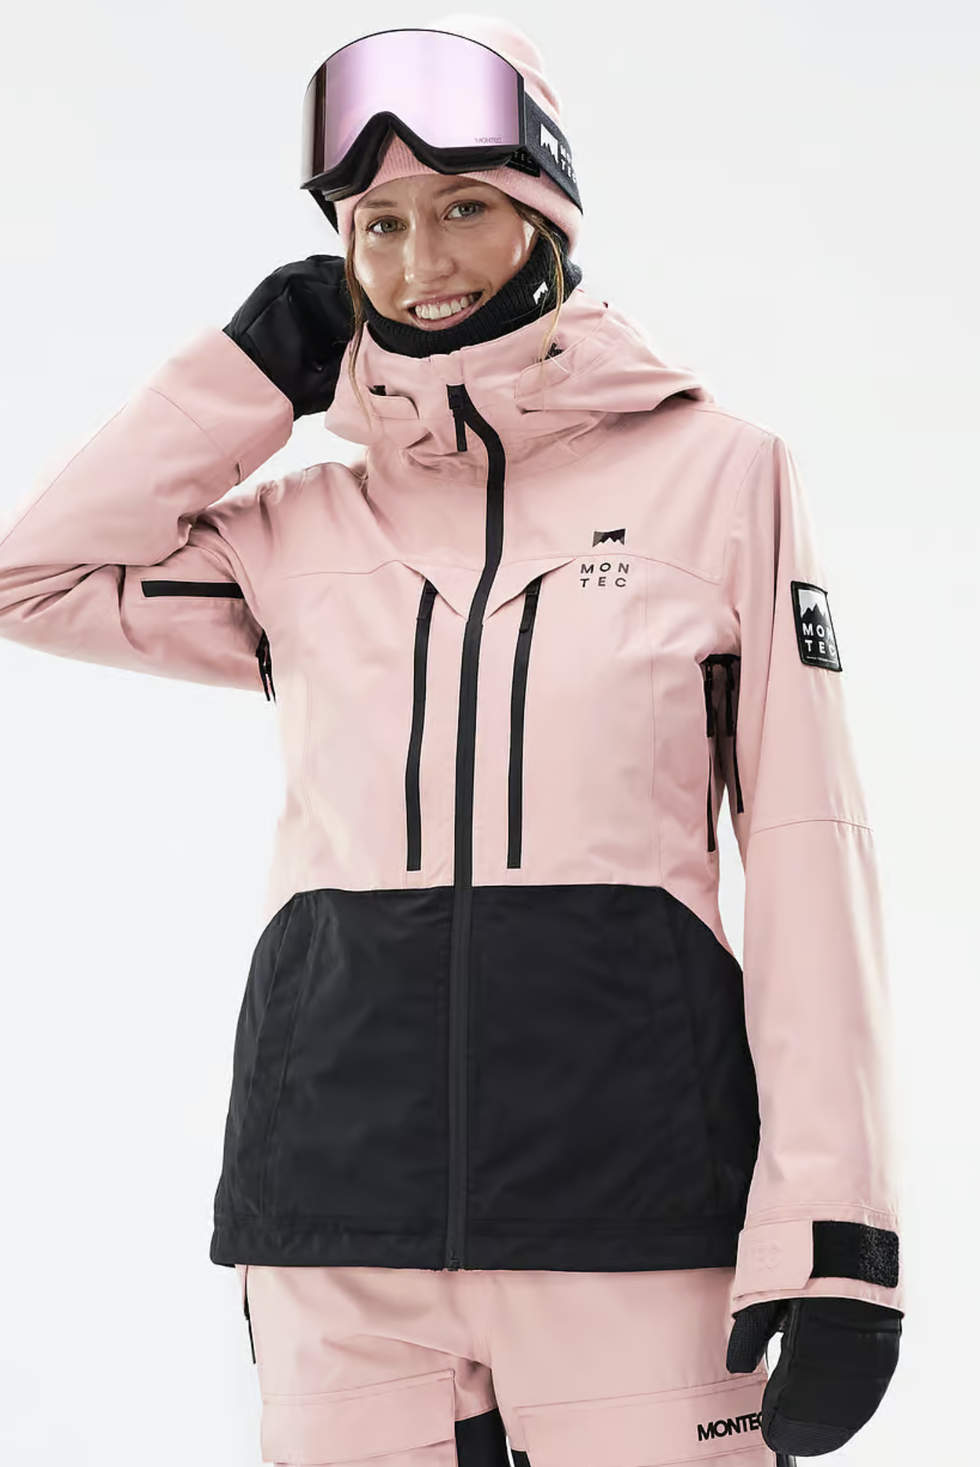 The 10 best women's ski jackets of 2023, per experts